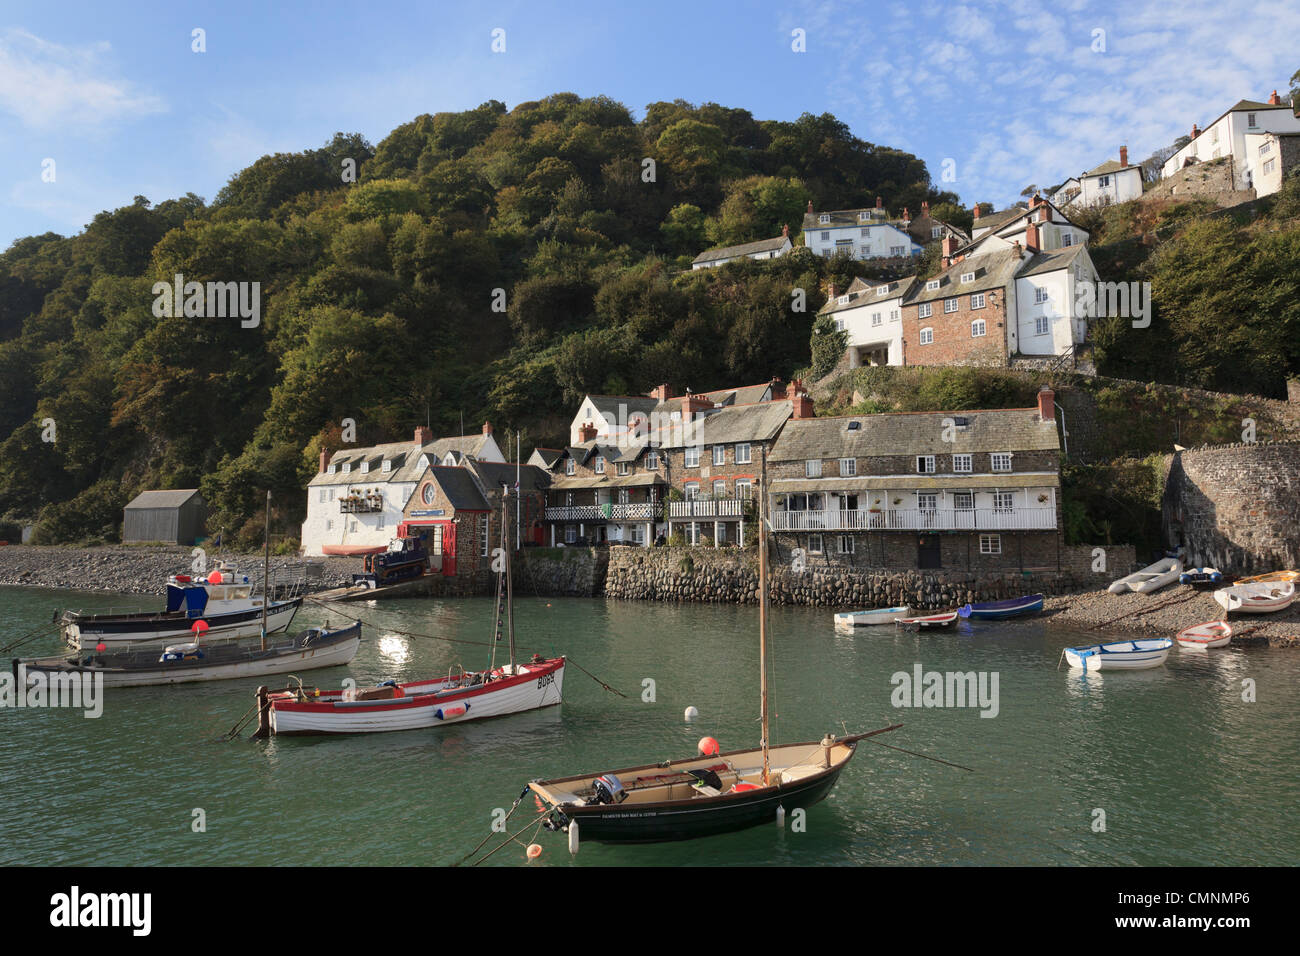 Coastal scene with boats in the harbour below the village on a steep hillside. Clovelly, Devon, England, UK, Britain Stock Photo